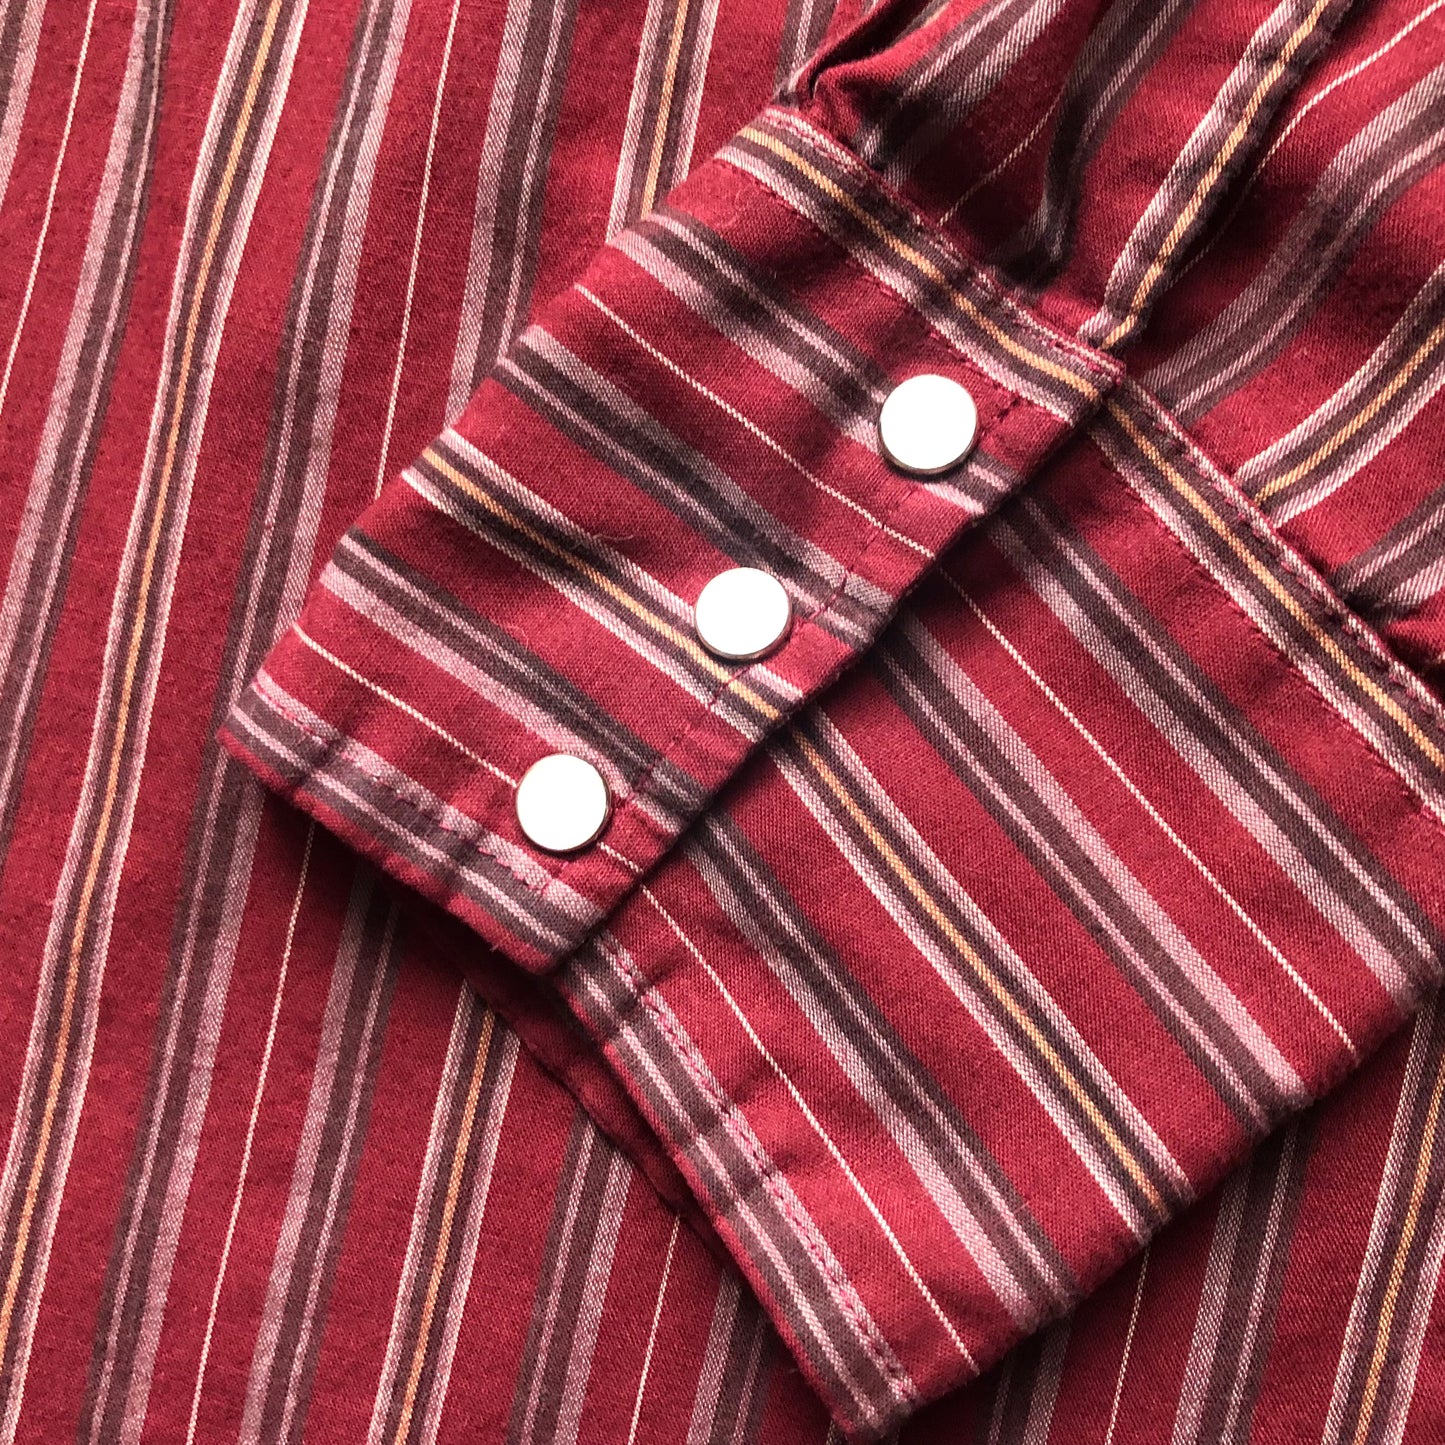 Vintage Western Men’s Striped Wrangler Shirt with Snap Buttons